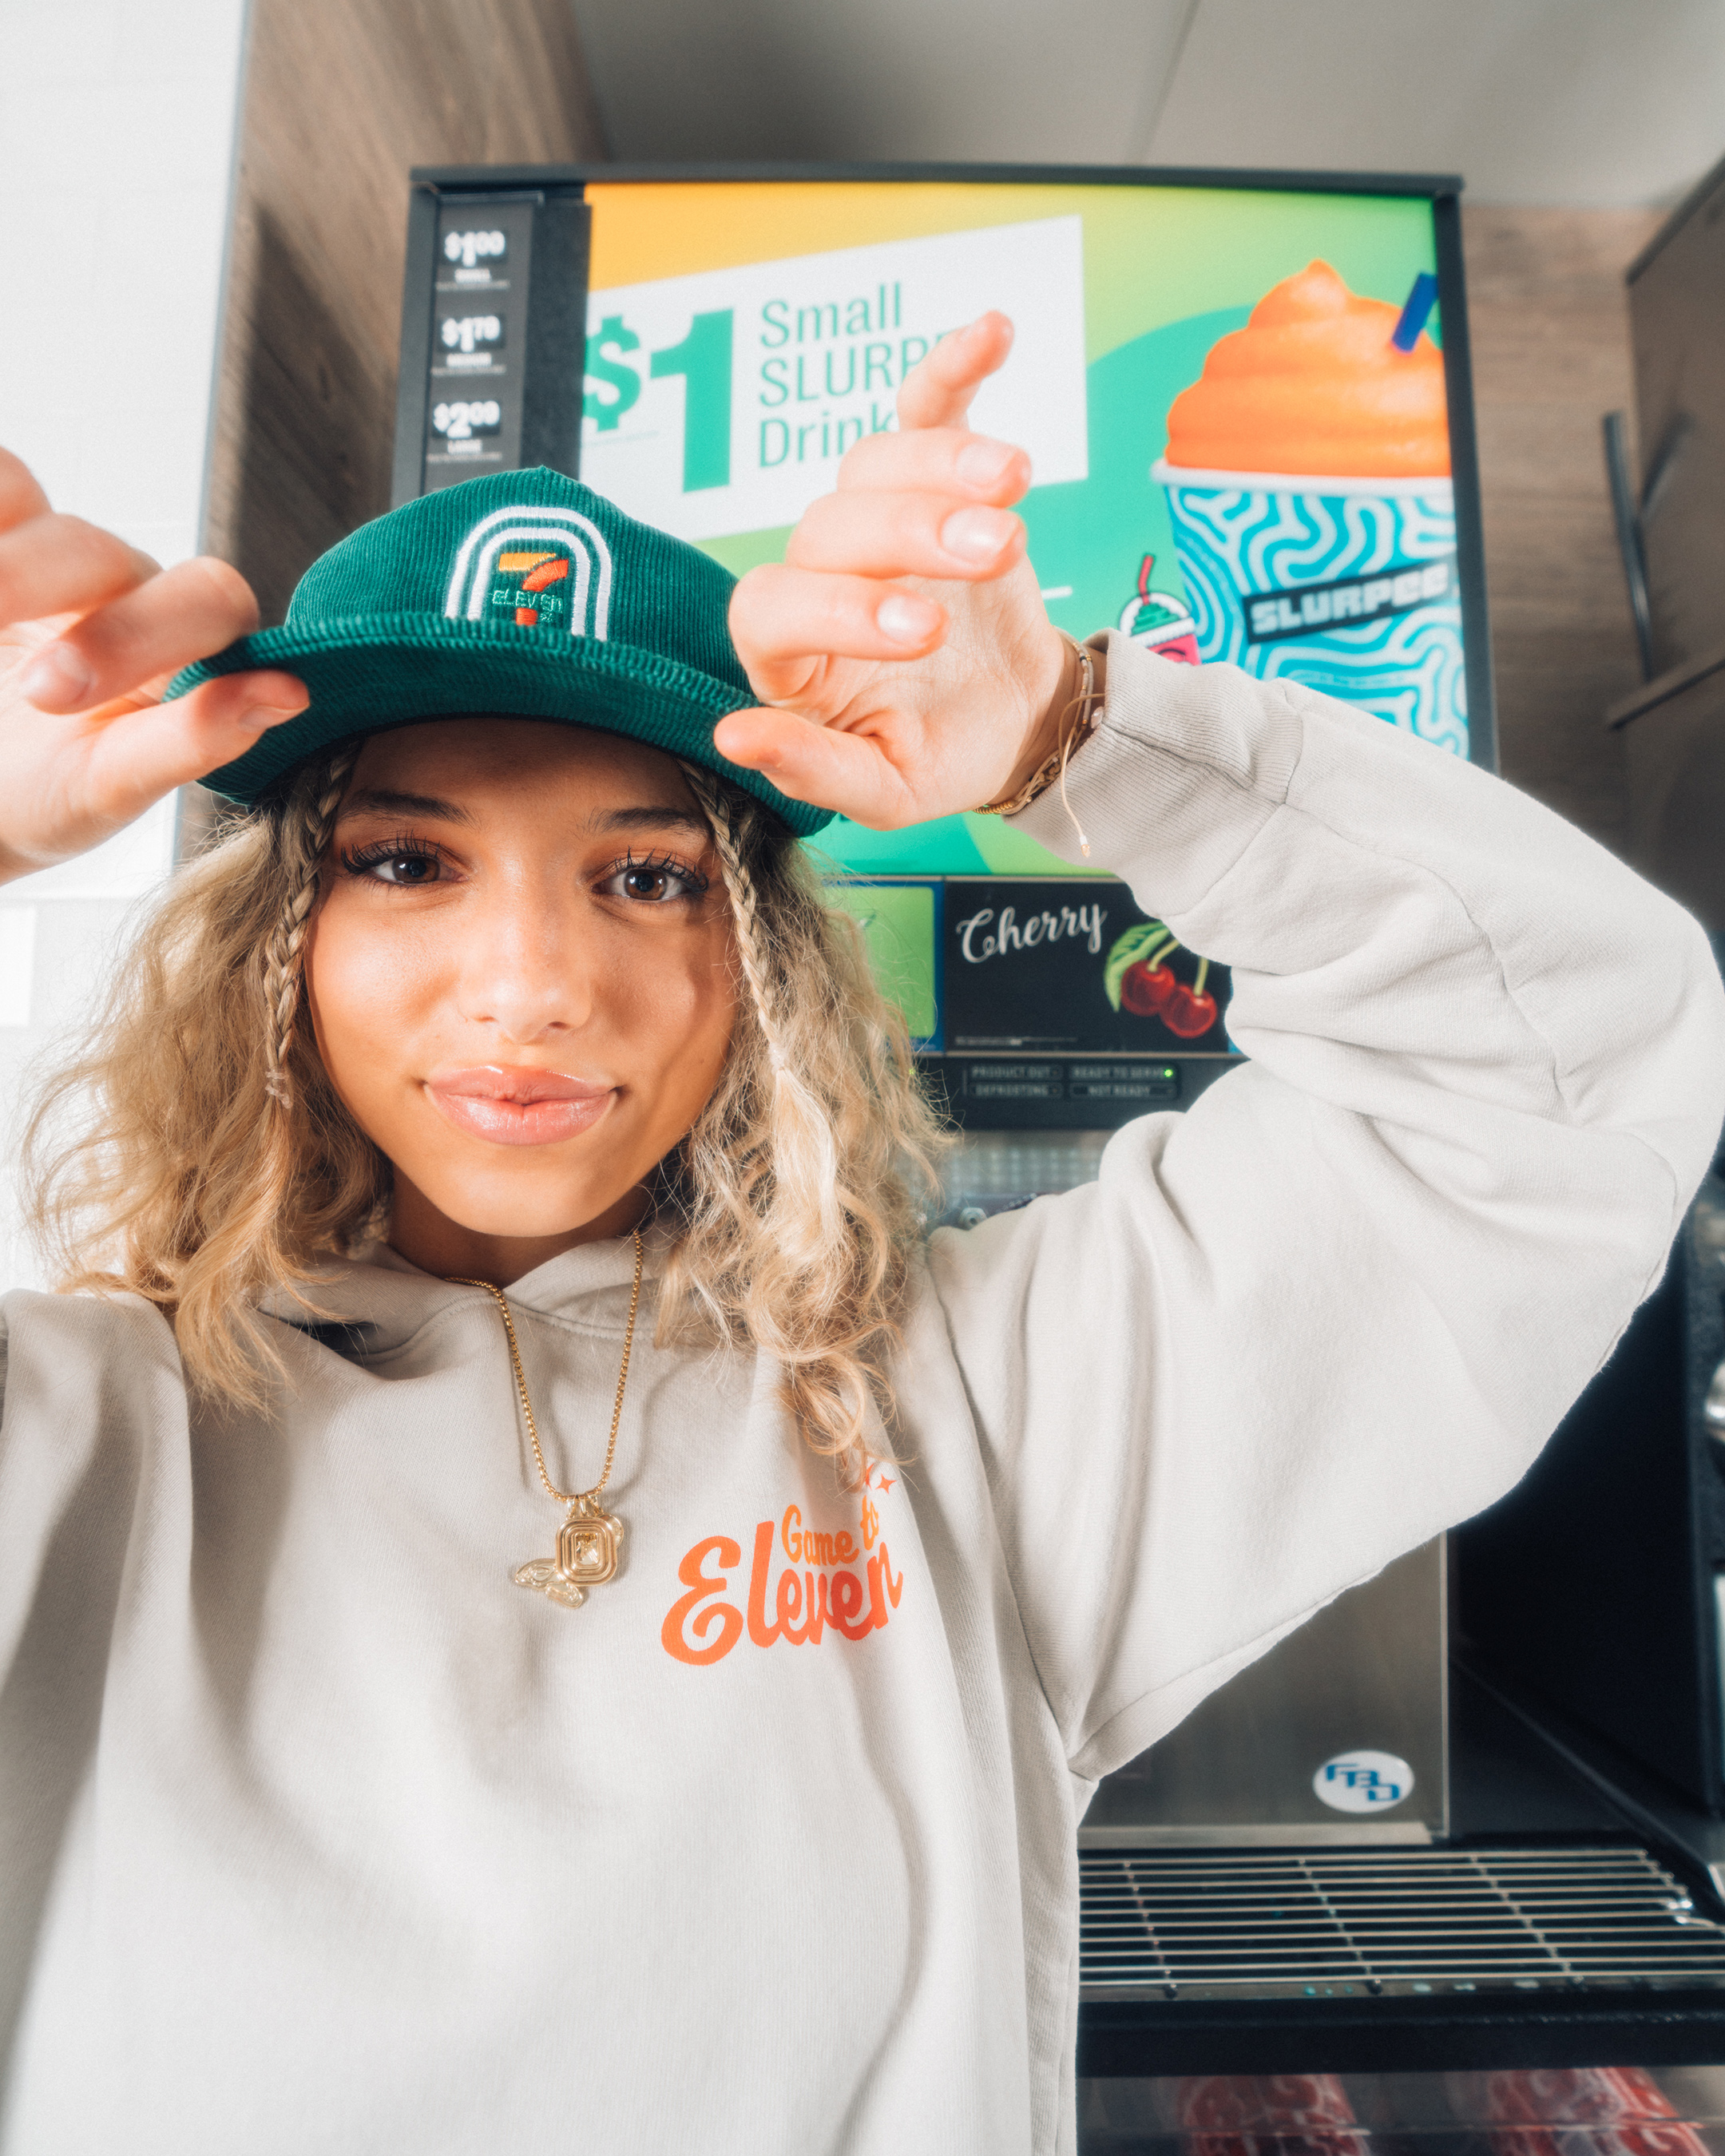 Drop it Like it's Haute: 7-Eleven Releases Limited-Edition Apparel Collection with Overtime and Easy Otabor